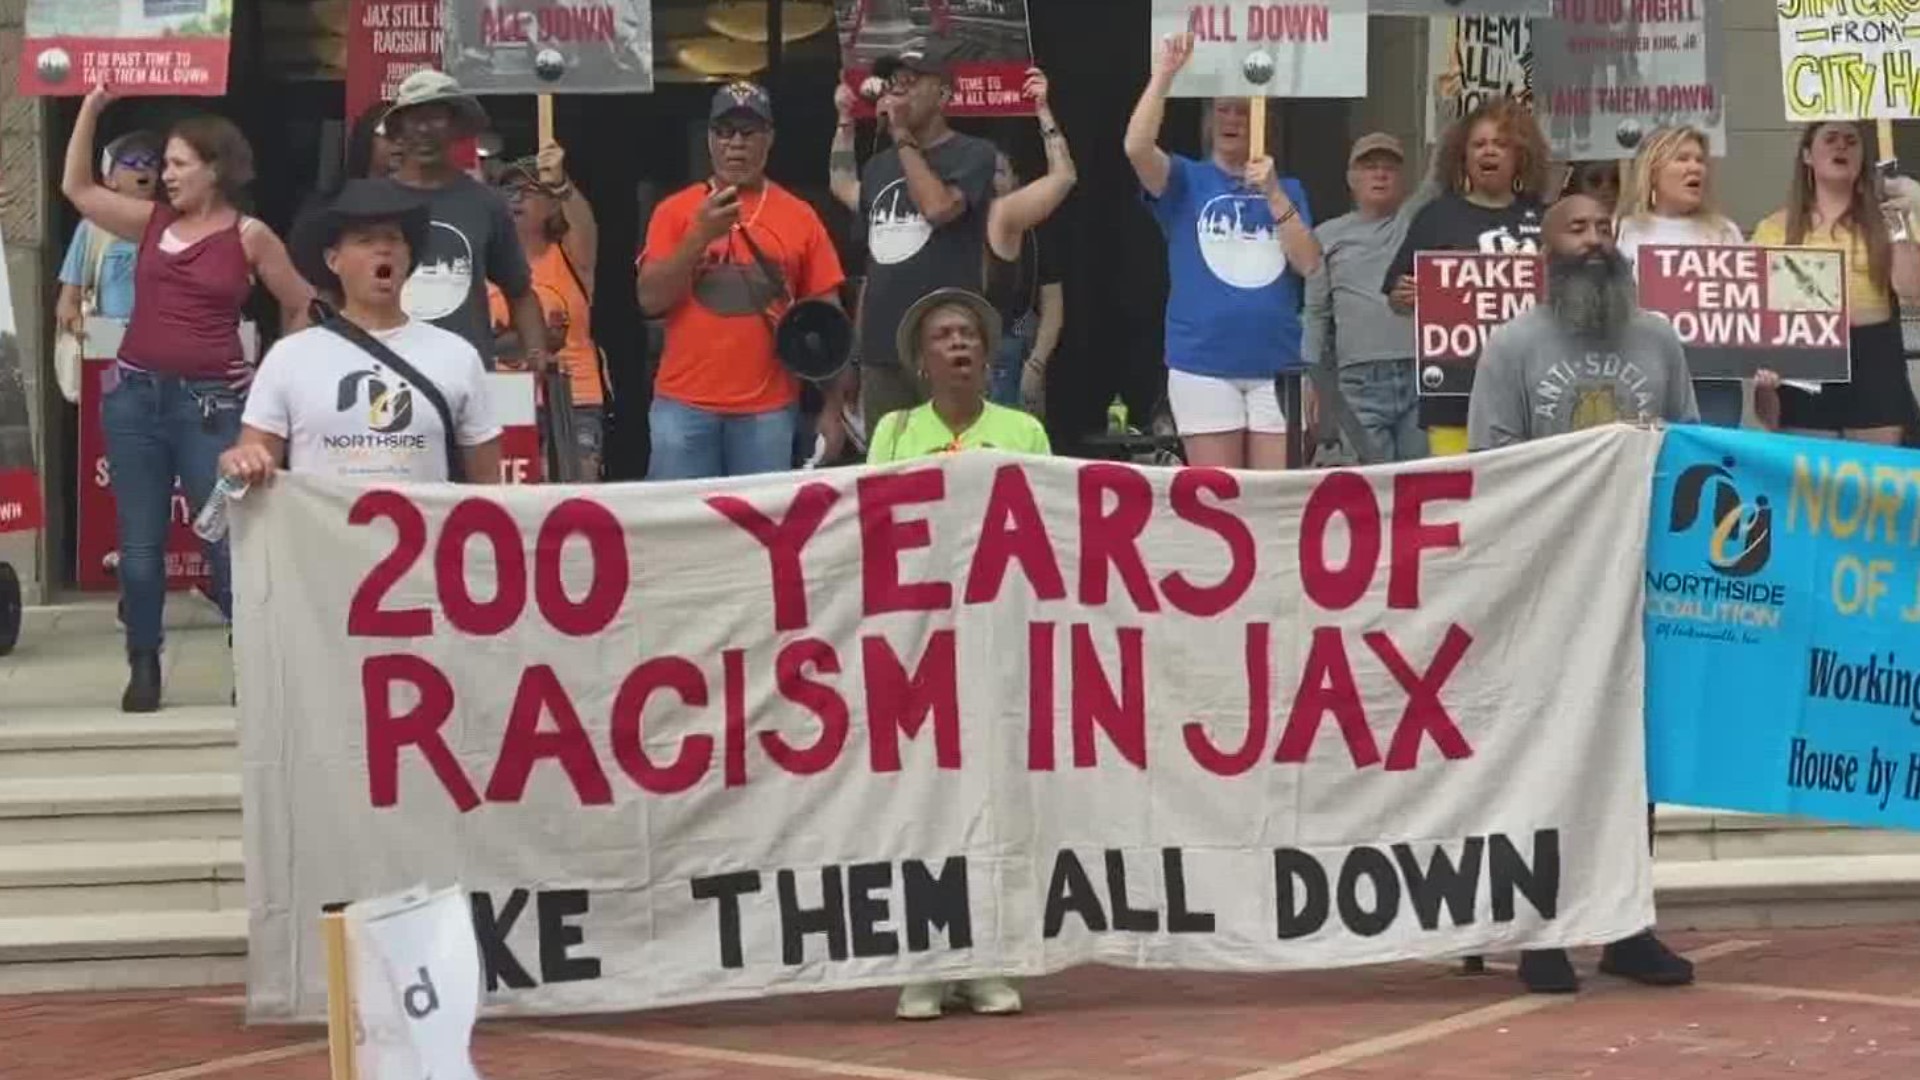 Jacksonville's history is being celebrated with festivities all weekend -- but protestors say some historical relics need to go.